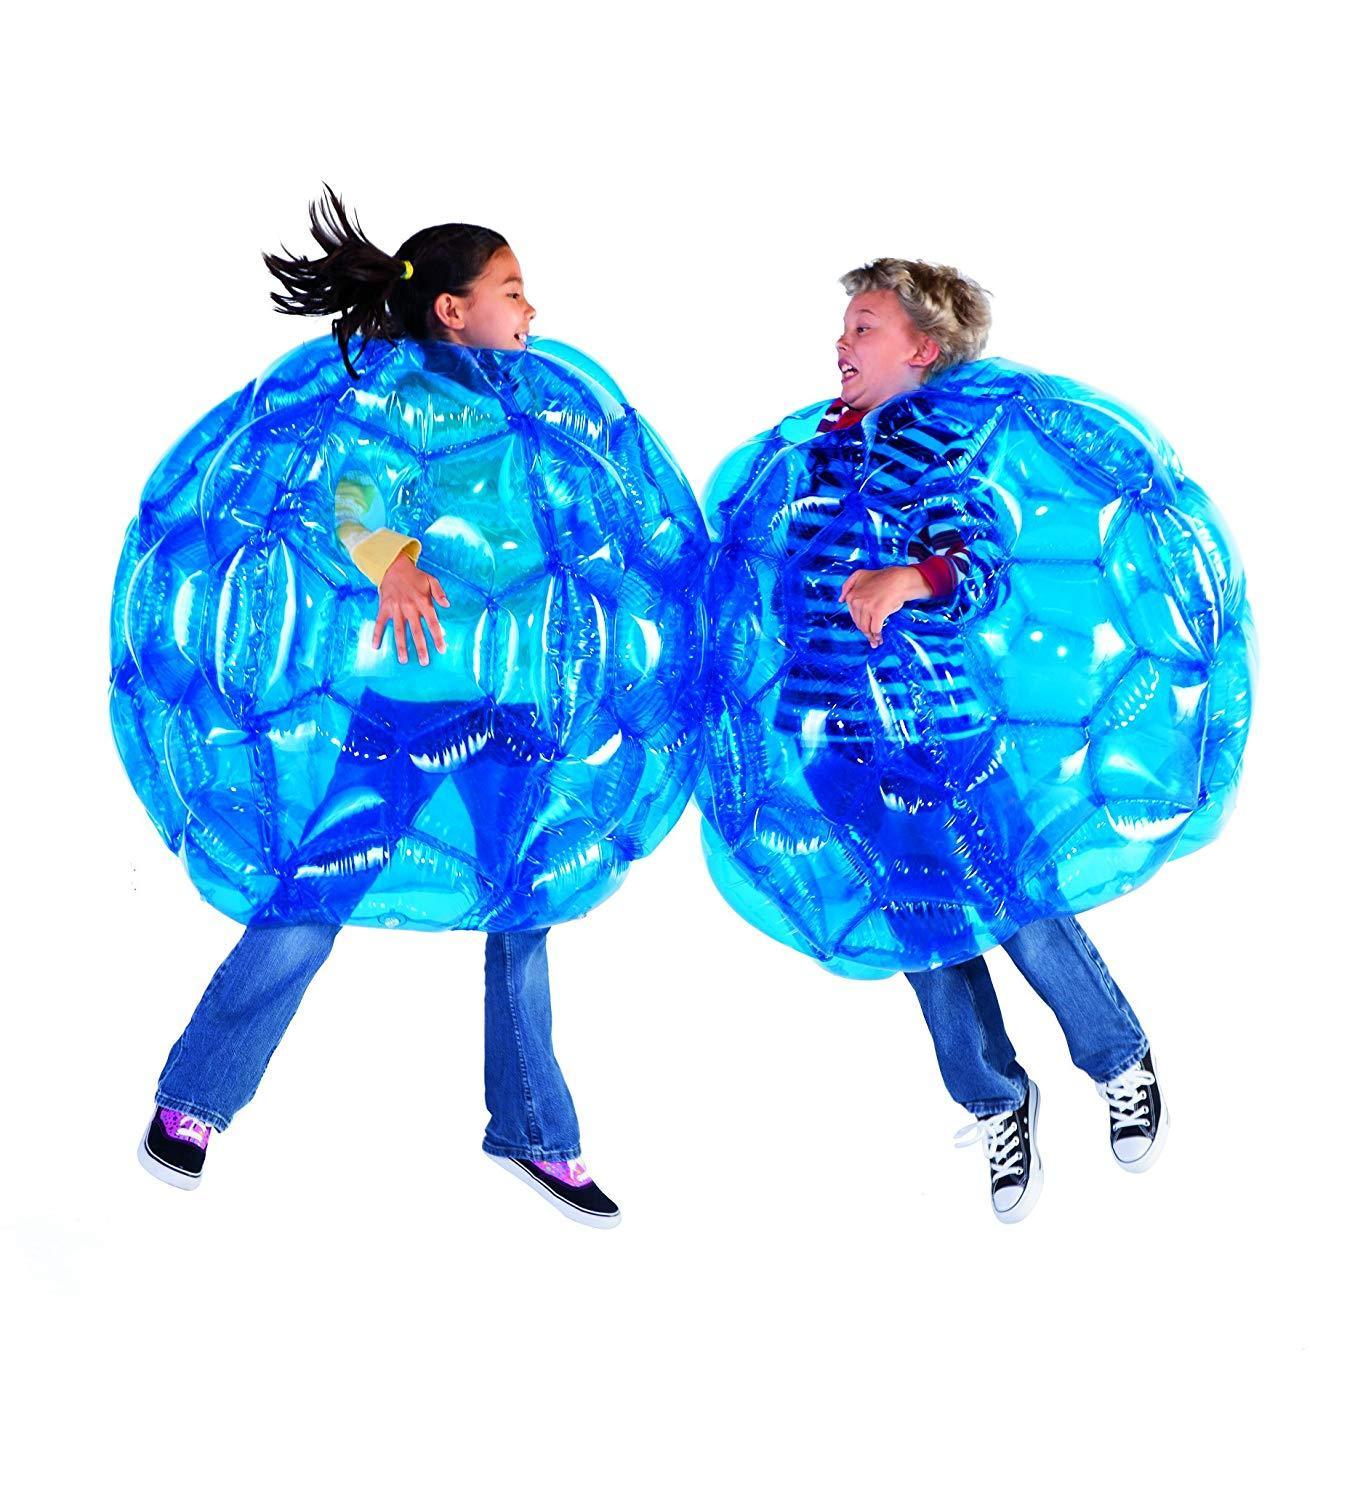 Inflatable Human Sized Hamster Bumper Ball - Westfield Retailers